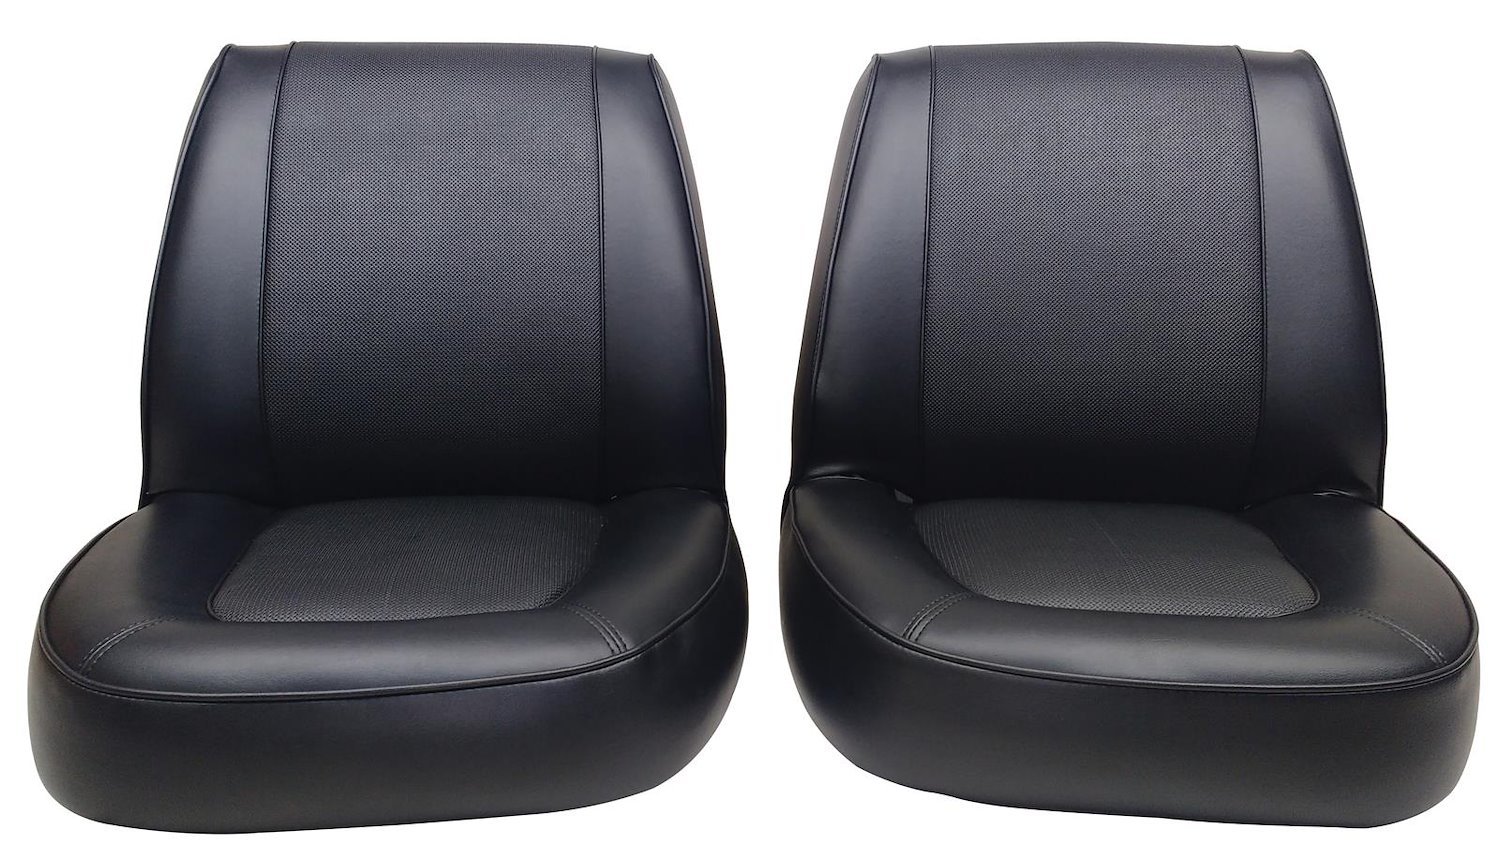 1966-1967 Ford Econoline Falcon Deluxe Club Wagon  Two-Tone Interior Front Bucket Seat Upholstery Set for models equipped with f